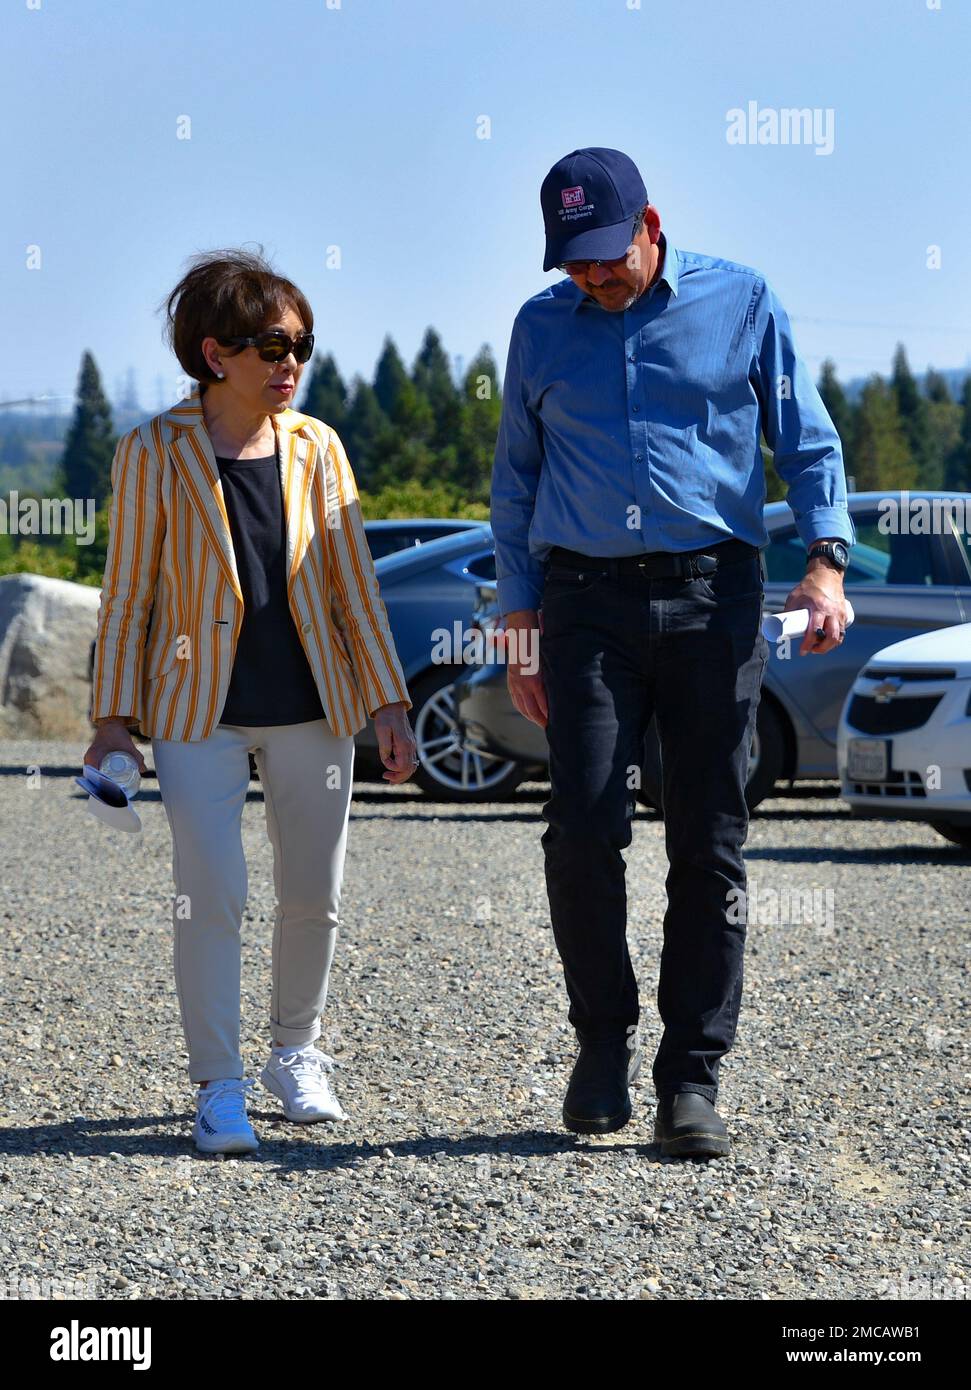 Rep. Doris Matsui (CA-06) walks with Michael Connor, assistant secretary of the Army for civil works, during a visit to Folsom Dam Dike 8 in Folsom, California, June 28, 2022. Connor visited the U.S. Army Corps of Engineers Sacramento District, which raised Dike 8 by 3.5 feet in 2020, to better understand the flood control infrastructure in the Sacramento area and how the district has been partnering with state and local agencies to improve this infrastructure over the last few decades. Planned improvements to the rest of Folsom Dam include 3.5-foot raises of Dikes 1-7, the Left and Right Wing Stock Photo